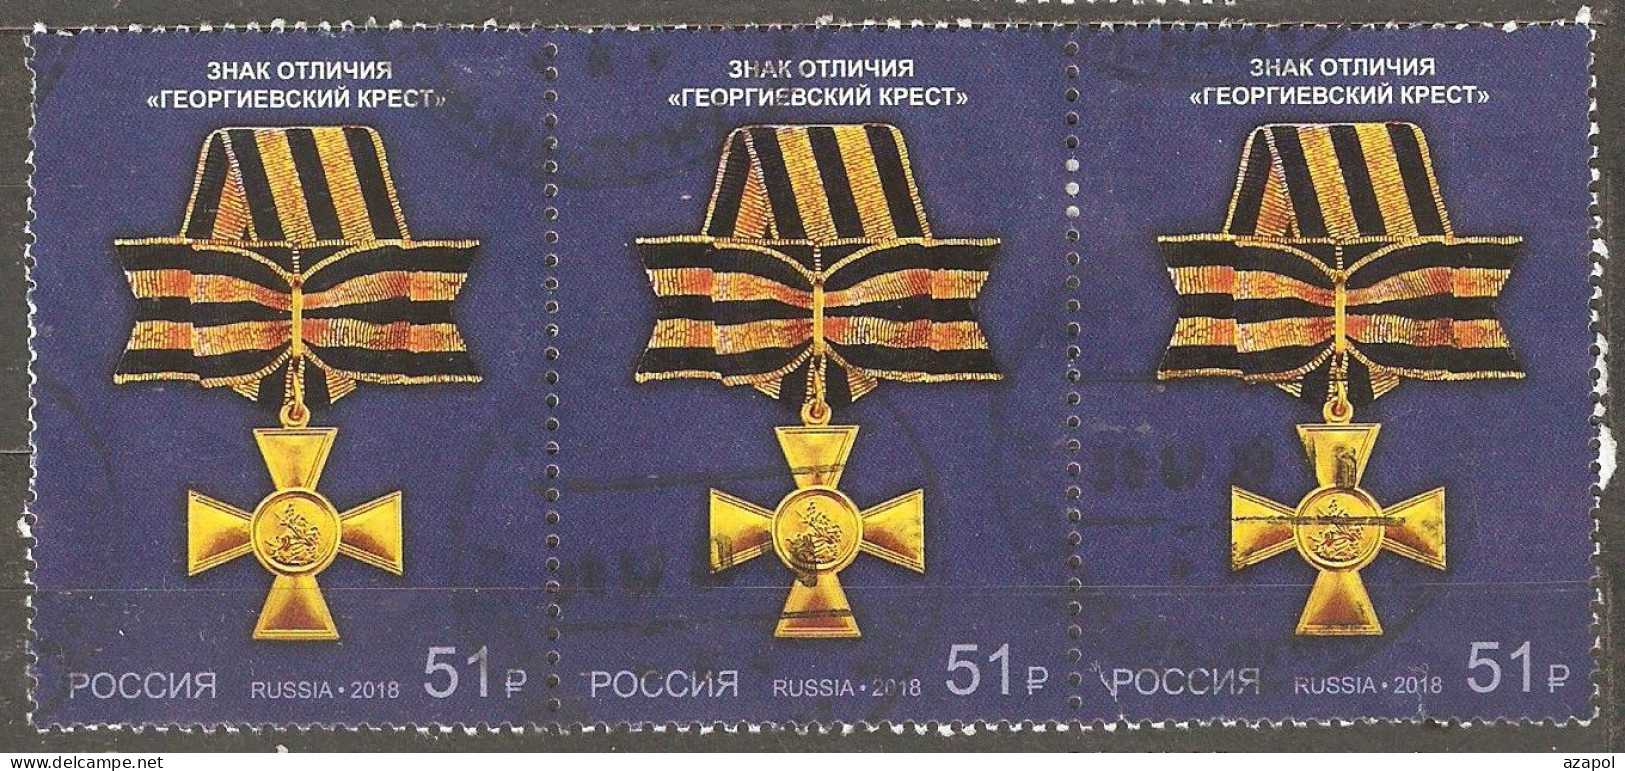 Russia: 1 Used Stamp Of A Set In Strip Of 3, State Awards Of Russian Federation - St. George's Cross, 2018, Mi#2647 - Gebraucht